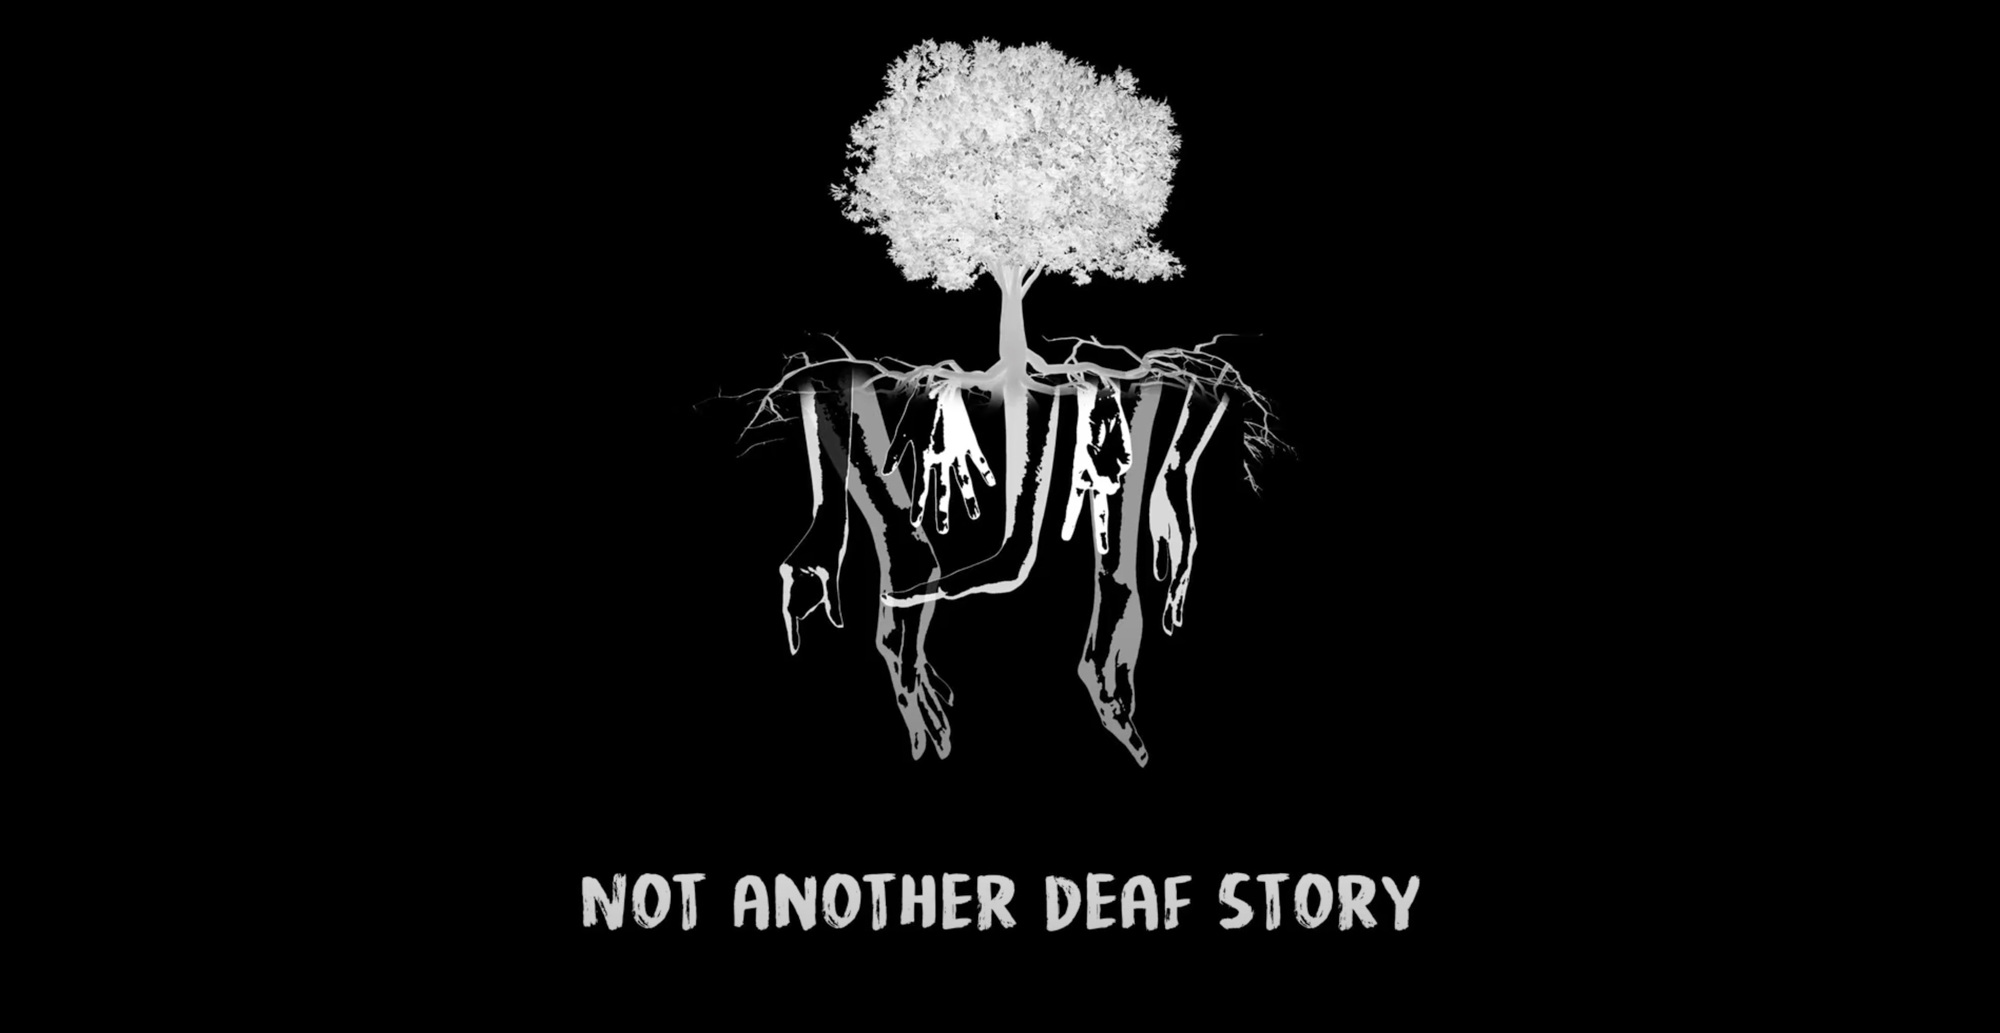 A photo shown in negative of a bushy tree appearing as a bright white tree with full foliage against a black background. Several illustrated handshapes that look like sign language emerge as roots of varying shades of white and grey. The title “Not Another Deaf Story” appears as a painted font at the bottom of the image.